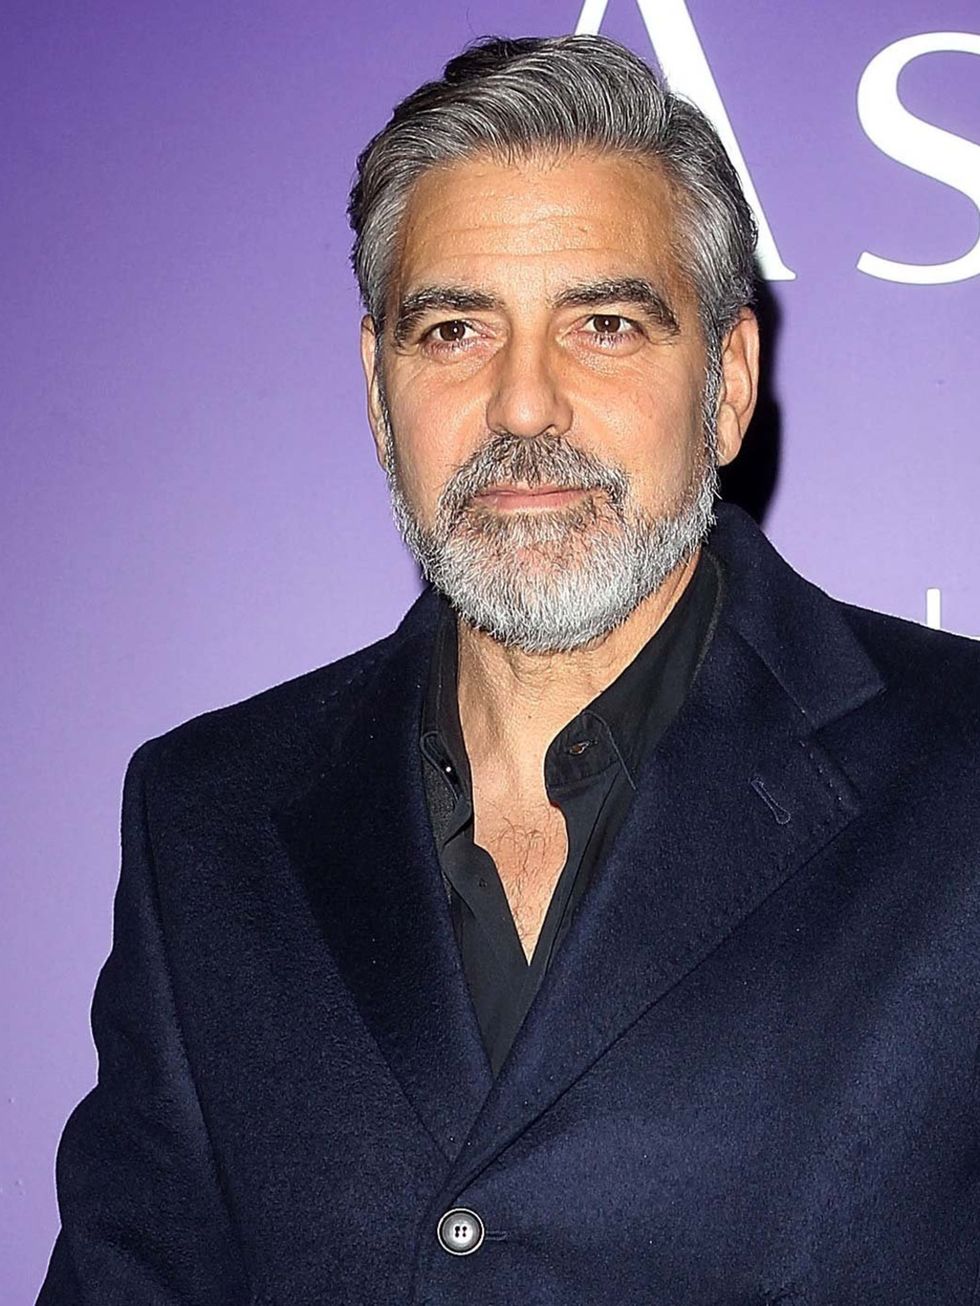 <p><strong>George Clooney</strong></p>

<p>ELLE says: 'We're not fans of George's facial fuzz and <a href="http://www.elleuk.com/wedding/george-clooney-married-amal-alamuddin-venice-27-september-2014">he walked down the aisle</a> clean-shaven. Coincidence